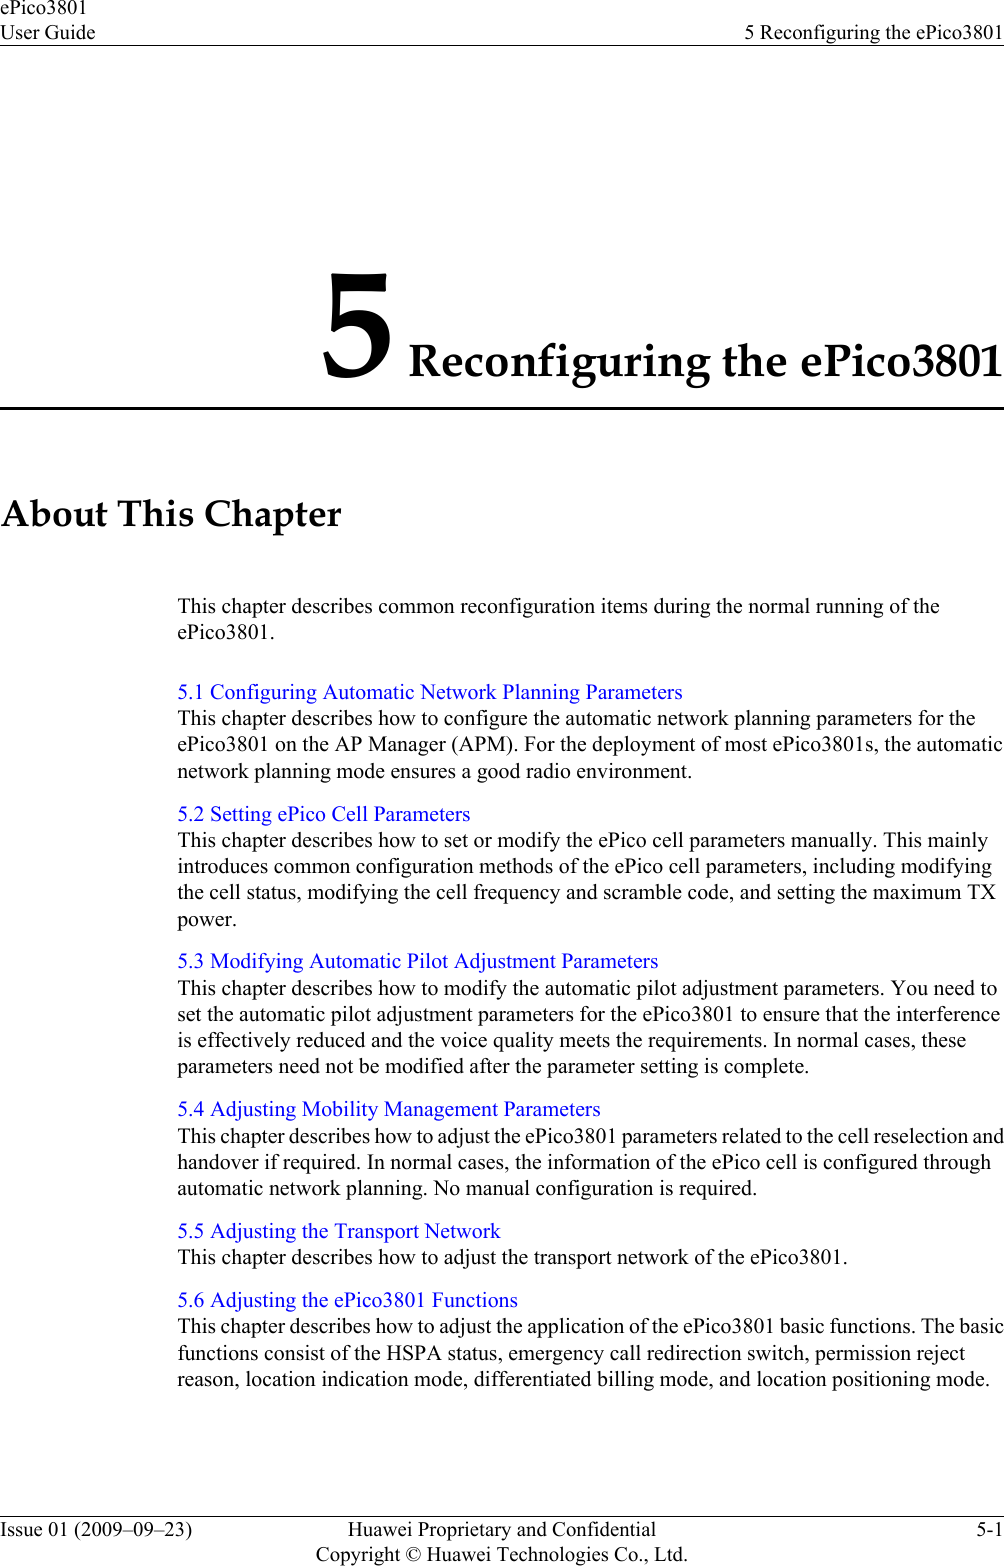 5 Reconfiguring the ePico3801About This ChapterThis chapter describes common reconfiguration items during the normal running of theePico3801.5.1 Configuring Automatic Network Planning ParametersThis chapter describes how to configure the automatic network planning parameters for theePico3801 on the AP Manager (APM). For the deployment of most ePico3801s, the automaticnetwork planning mode ensures a good radio environment.5.2 Setting ePico Cell ParametersThis chapter describes how to set or modify the ePico cell parameters manually. This mainlyintroduces common configuration methods of the ePico cell parameters, including modifyingthe cell status, modifying the cell frequency and scramble code, and setting the maximum TXpower.5.3 Modifying Automatic Pilot Adjustment ParametersThis chapter describes how to modify the automatic pilot adjustment parameters. You need toset the automatic pilot adjustment parameters for the ePico3801 to ensure that the interferenceis effectively reduced and the voice quality meets the requirements. In normal cases, theseparameters need not be modified after the parameter setting is complete.5.4 Adjusting Mobility Management ParametersThis chapter describes how to adjust the ePico3801 parameters related to the cell reselection andhandover if required. In normal cases, the information of the ePico cell is configured throughautomatic network planning. No manual configuration is required.5.5 Adjusting the Transport NetworkThis chapter describes how to adjust the transport network of the ePico3801.5.6 Adjusting the ePico3801 FunctionsThis chapter describes how to adjust the application of the ePico3801 basic functions. The basicfunctions consist of the HSPA status, emergency call redirection switch, permission rejectreason, location indication mode, differentiated billing mode, and location positioning mode.ePico3801User Guide 5 Reconfiguring the ePico3801Issue 01 (2009–09–23) Huawei Proprietary and ConfidentialCopyright © Huawei Technologies Co., Ltd.5-1